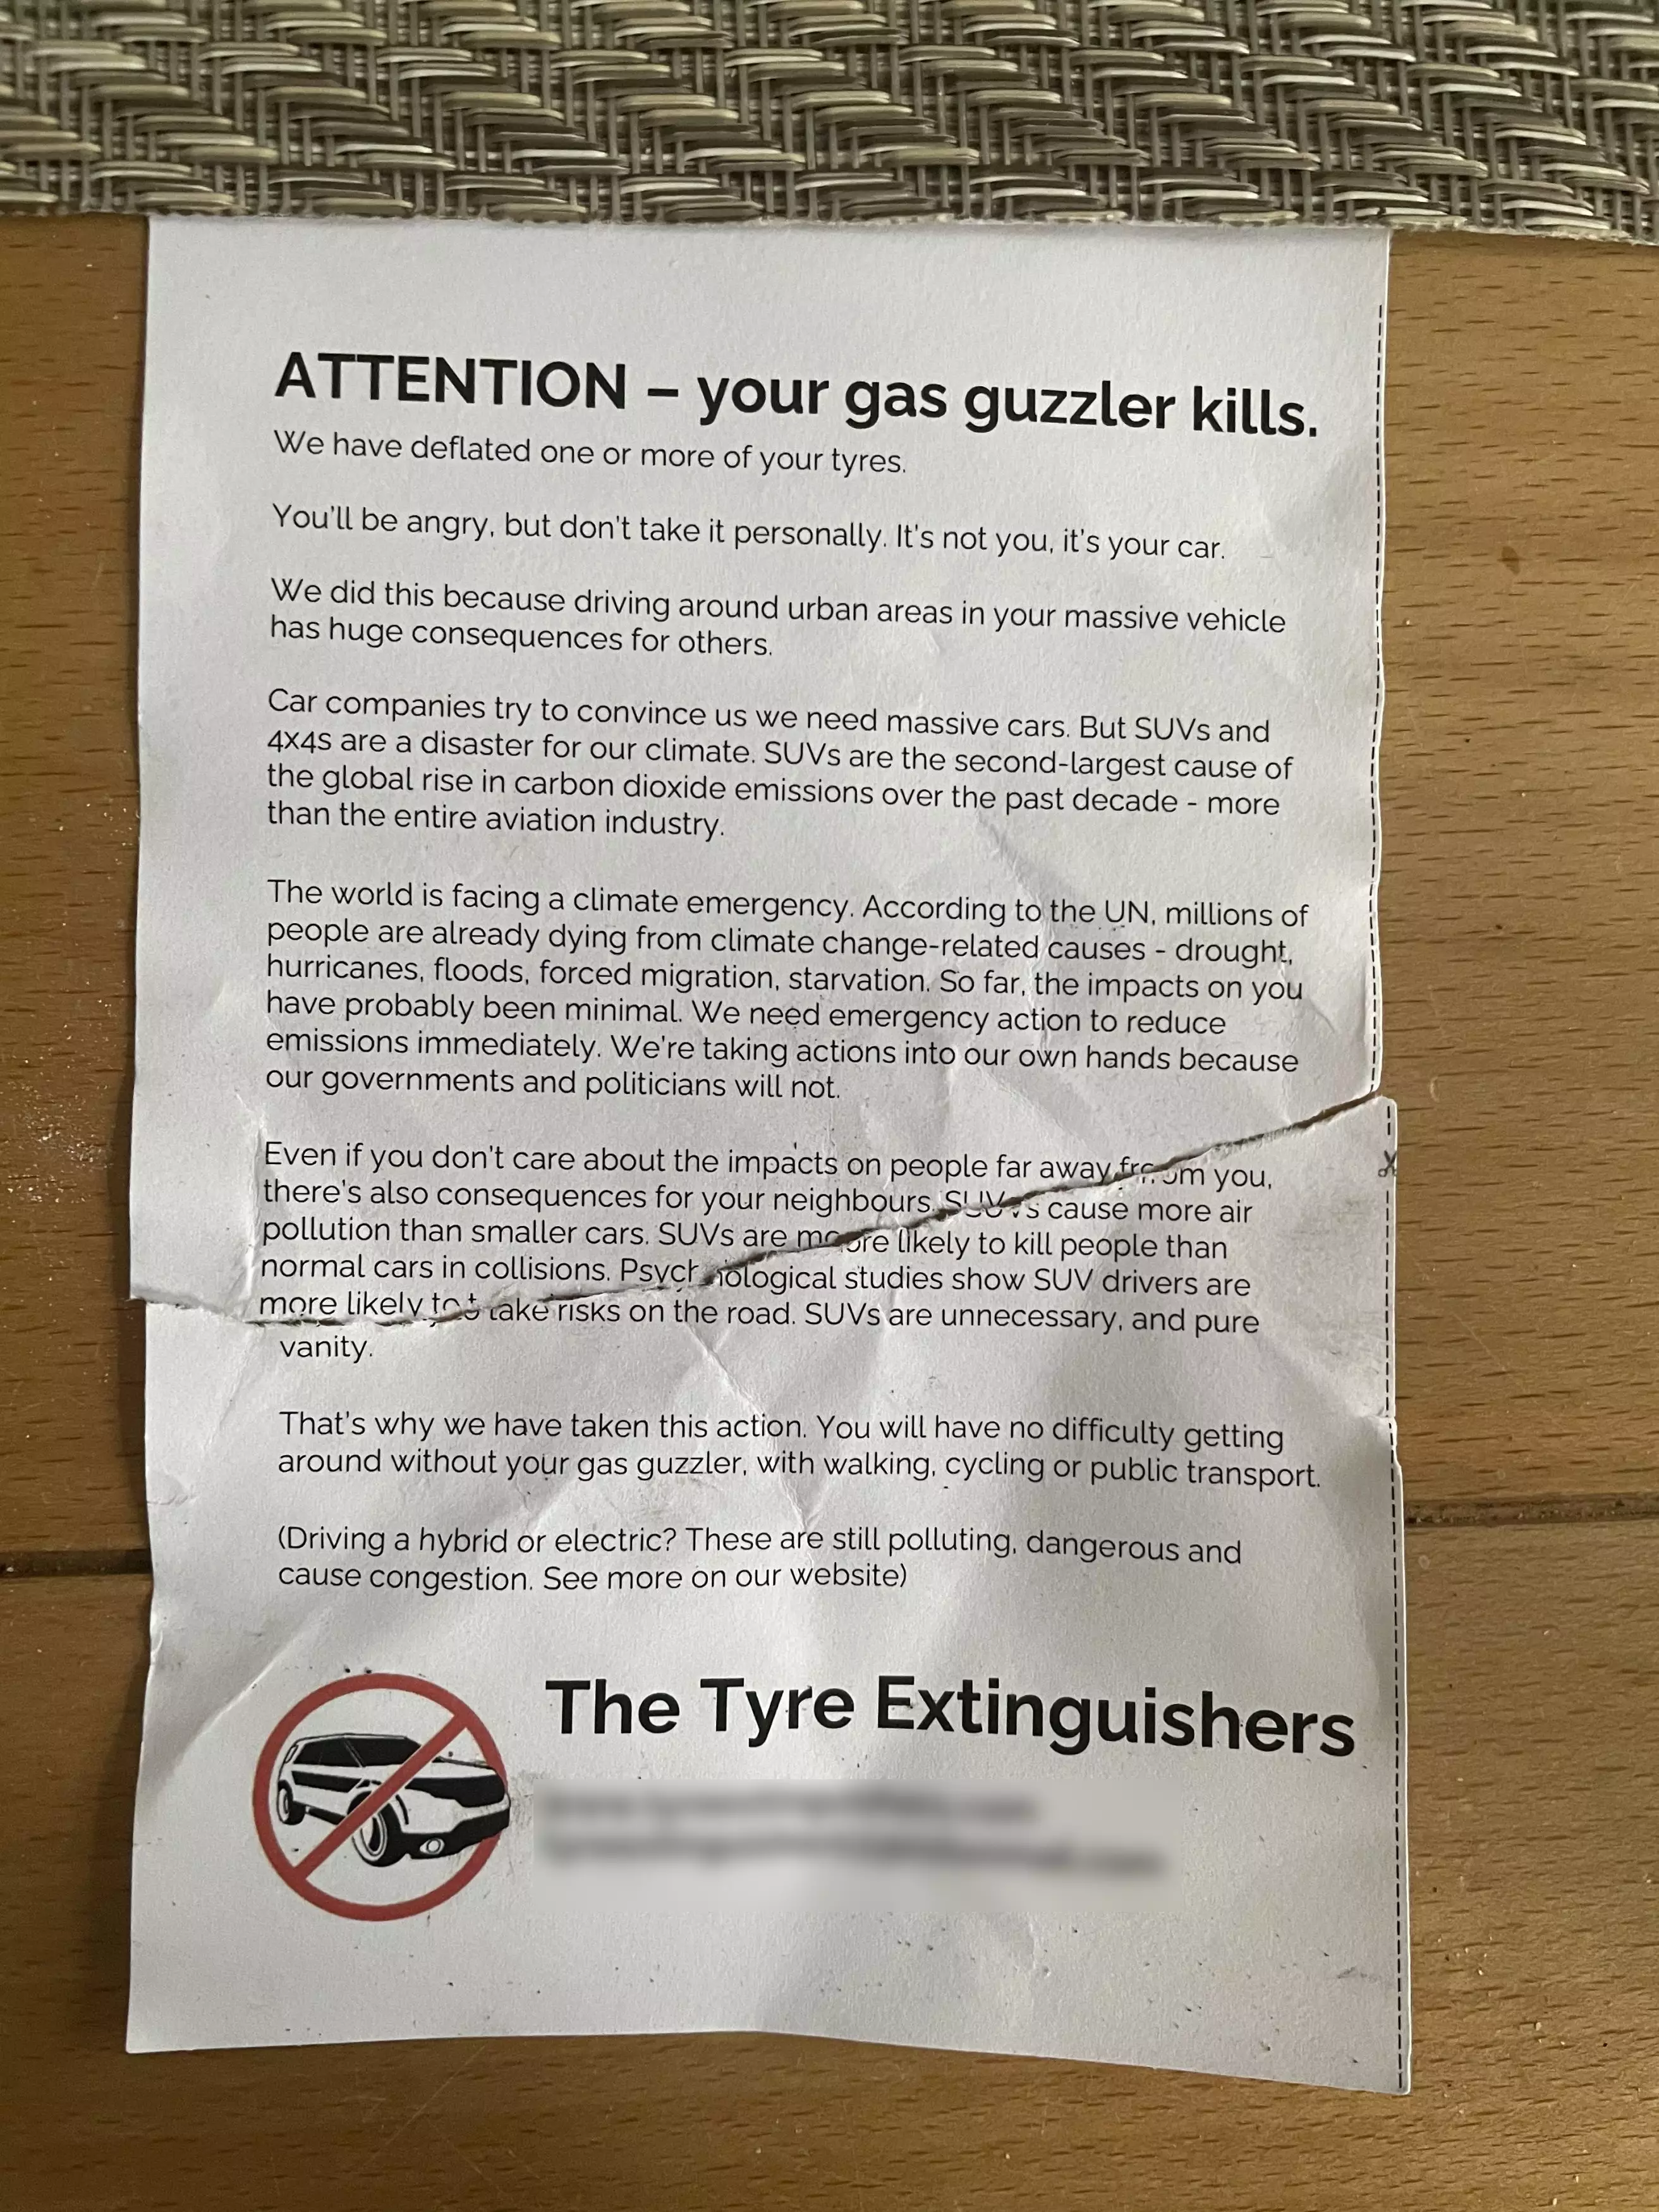 The note left by the Tyre Extinguishers.